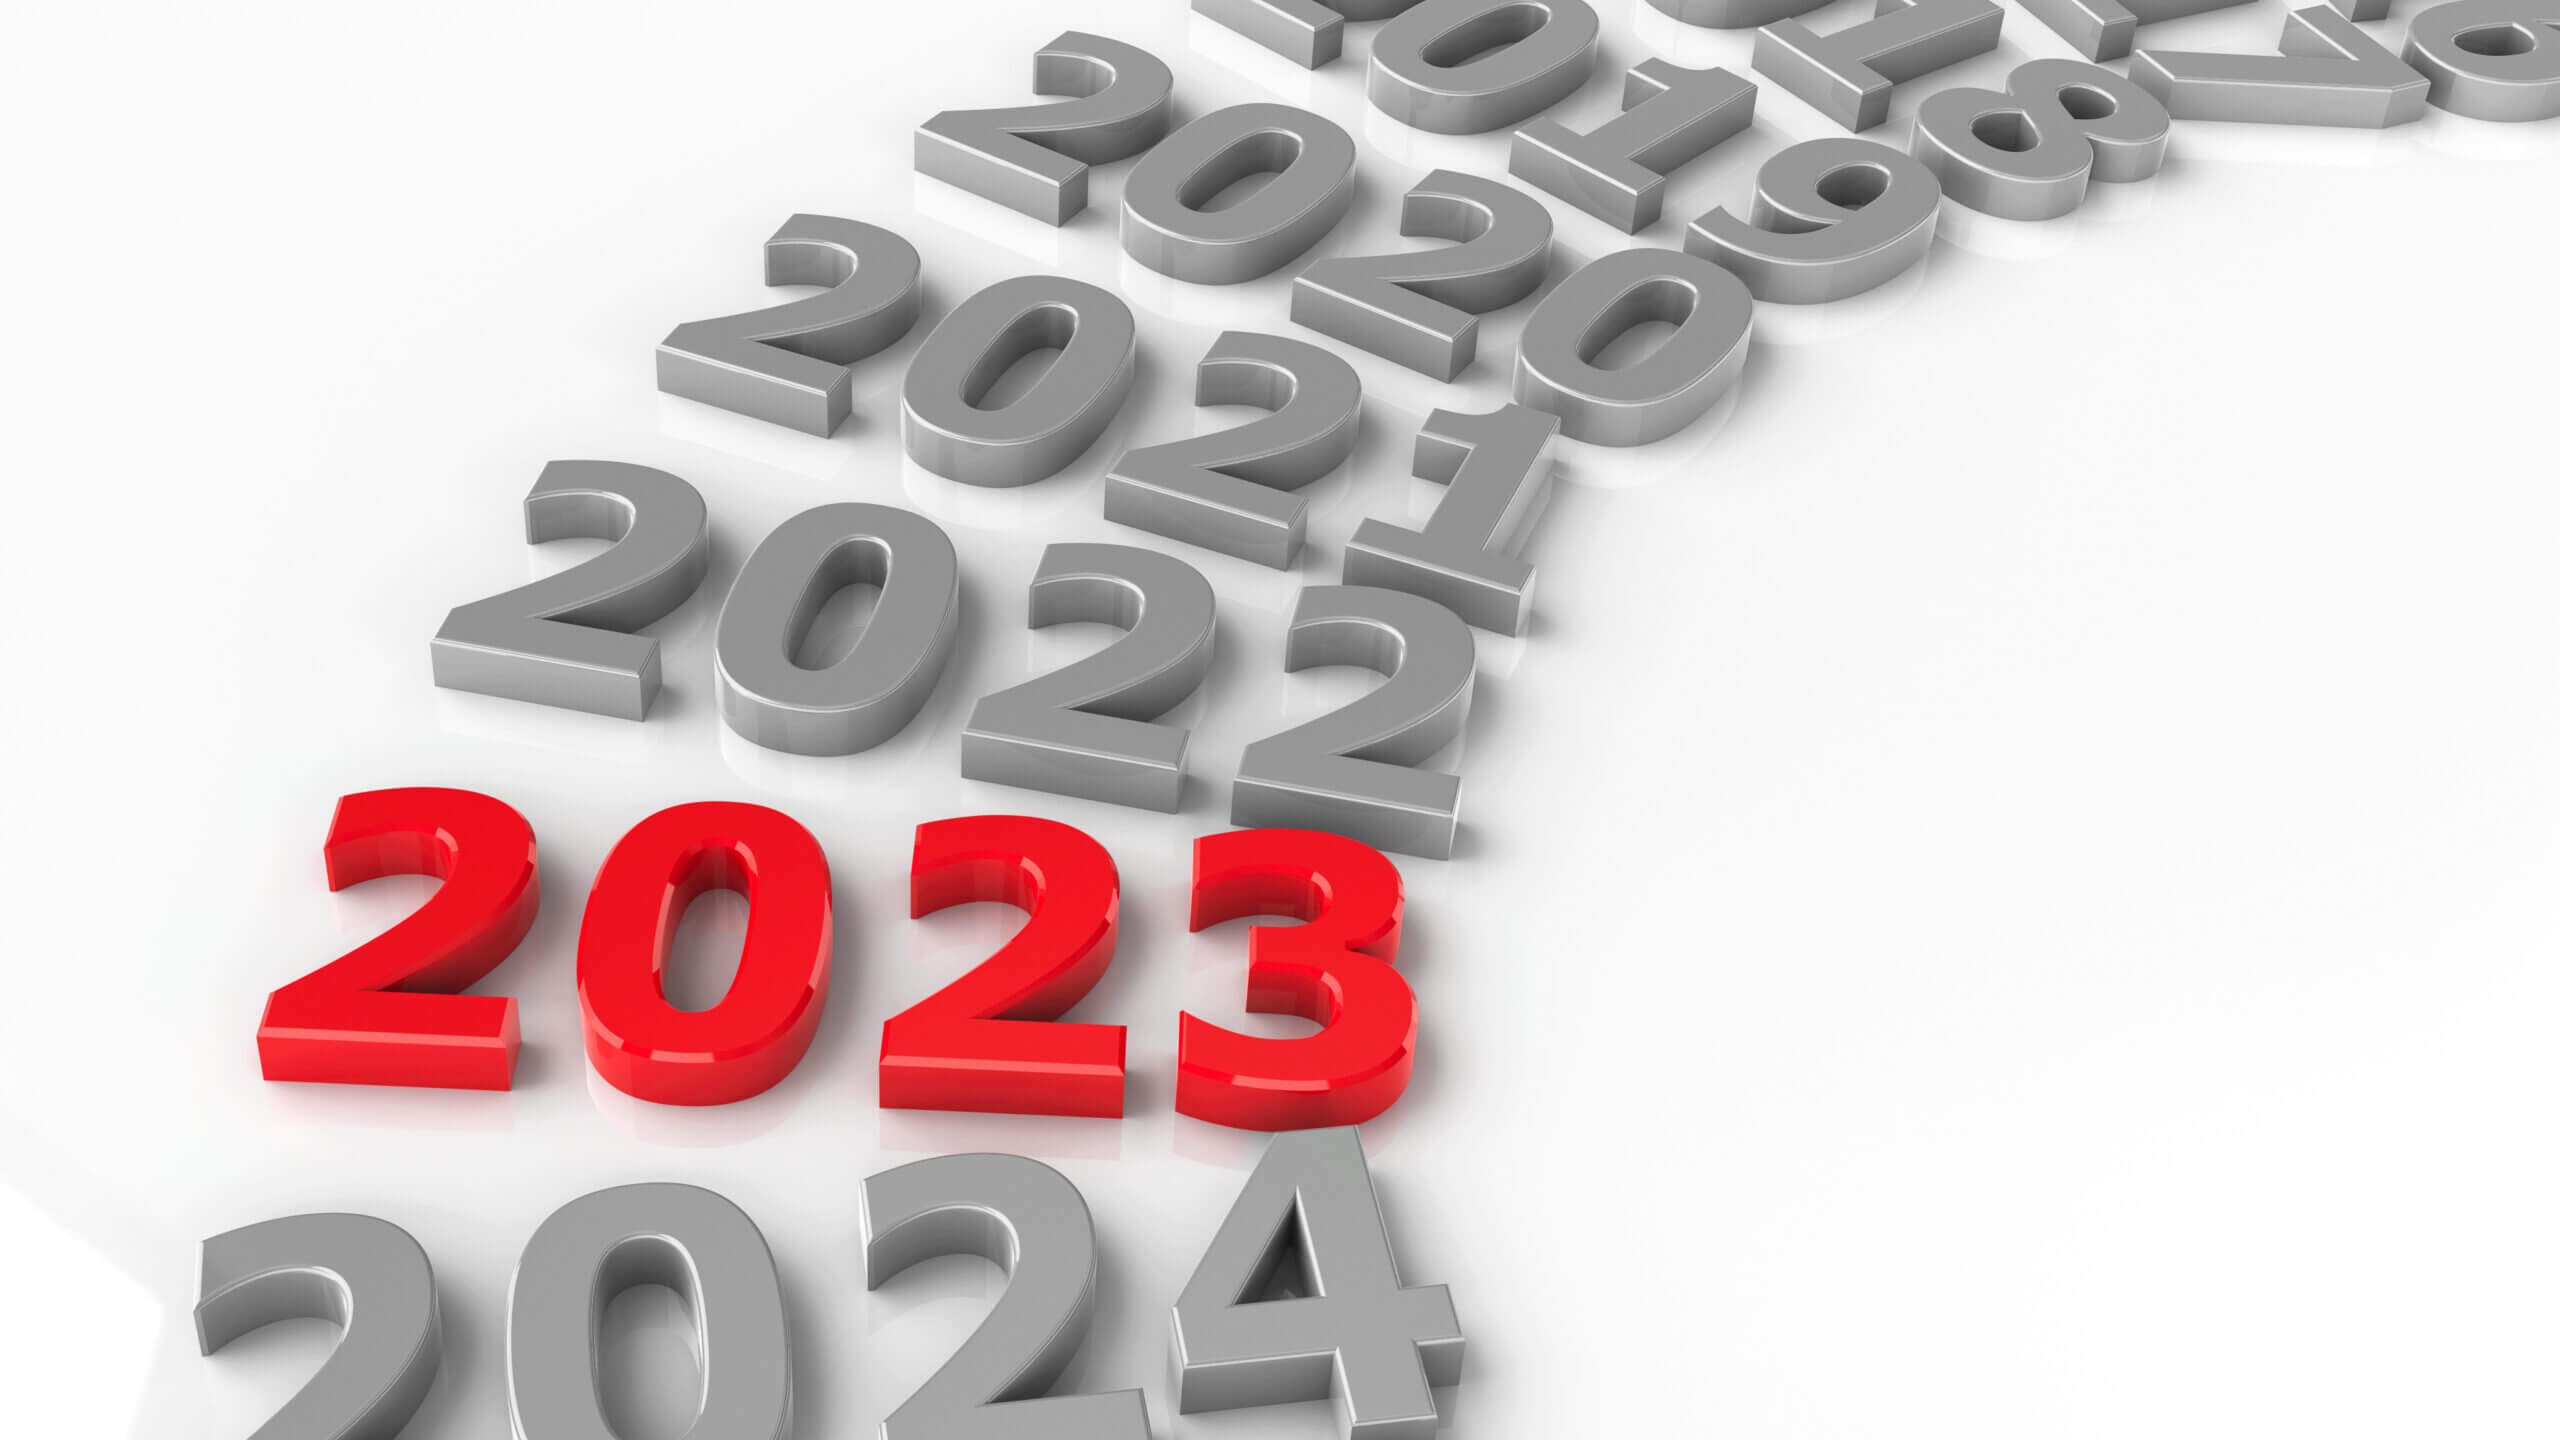 2023 past in the circle represents the new year 2023, three-dimensional rendering, 3D illustration